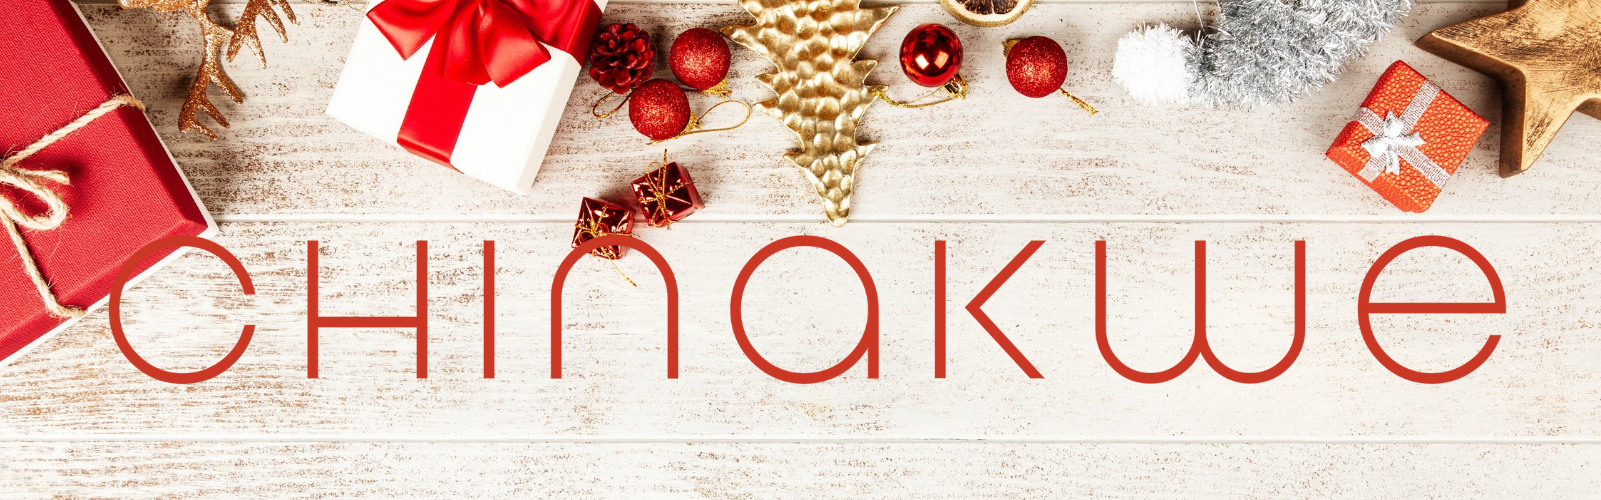 Chinakwe brand logo placed on wooden background surrounded by Christmas decorations and presents